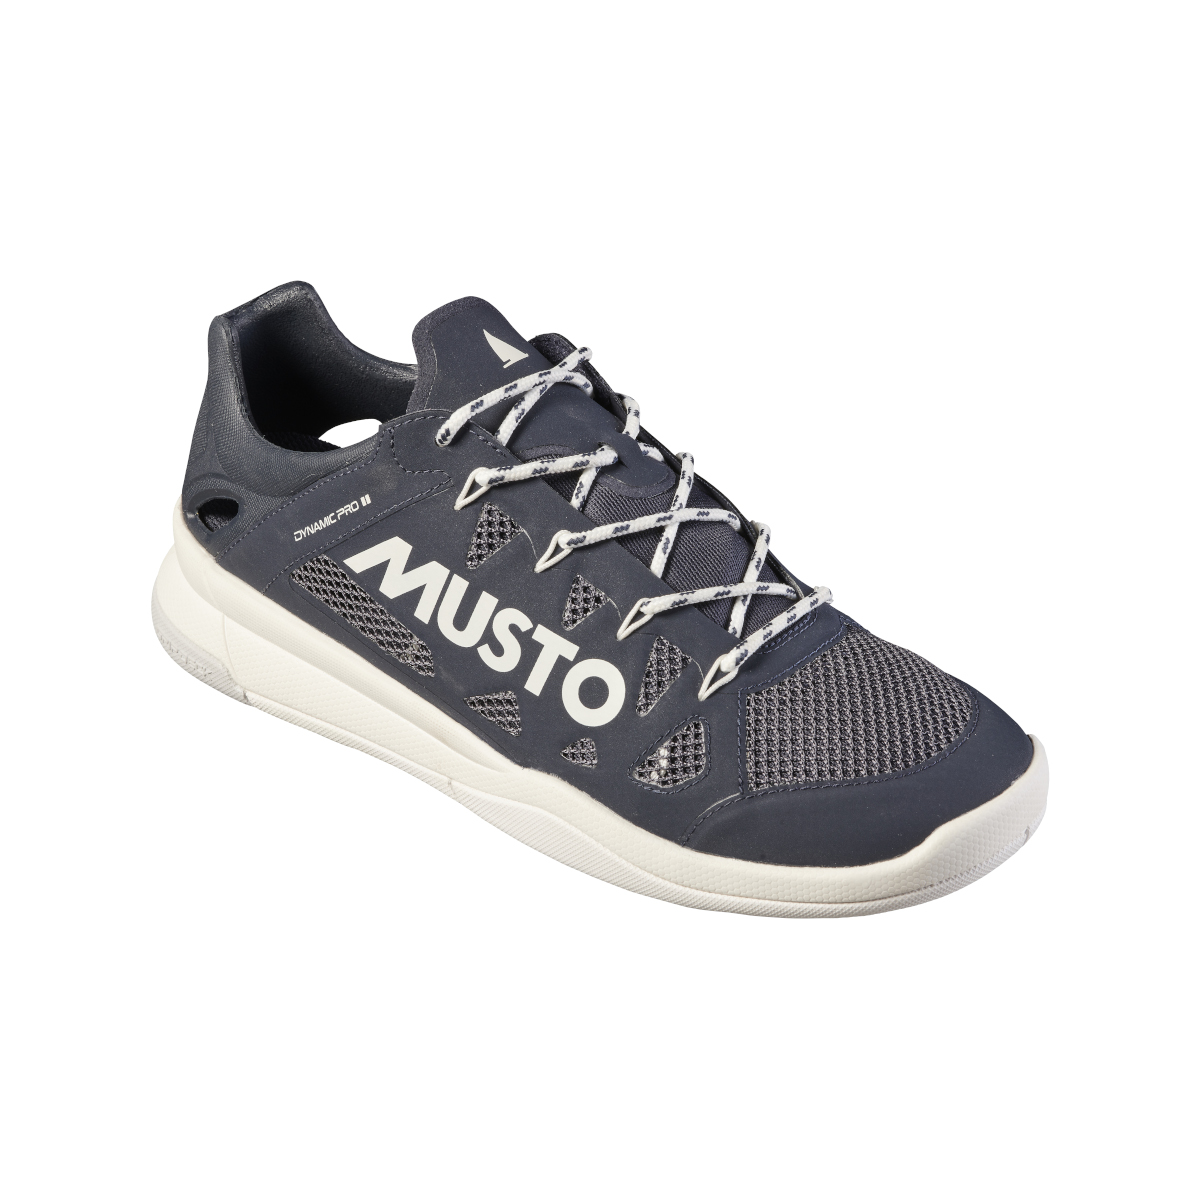 Musto Dynamic Pro II chaussures de voile homme bleu marine, taille 44